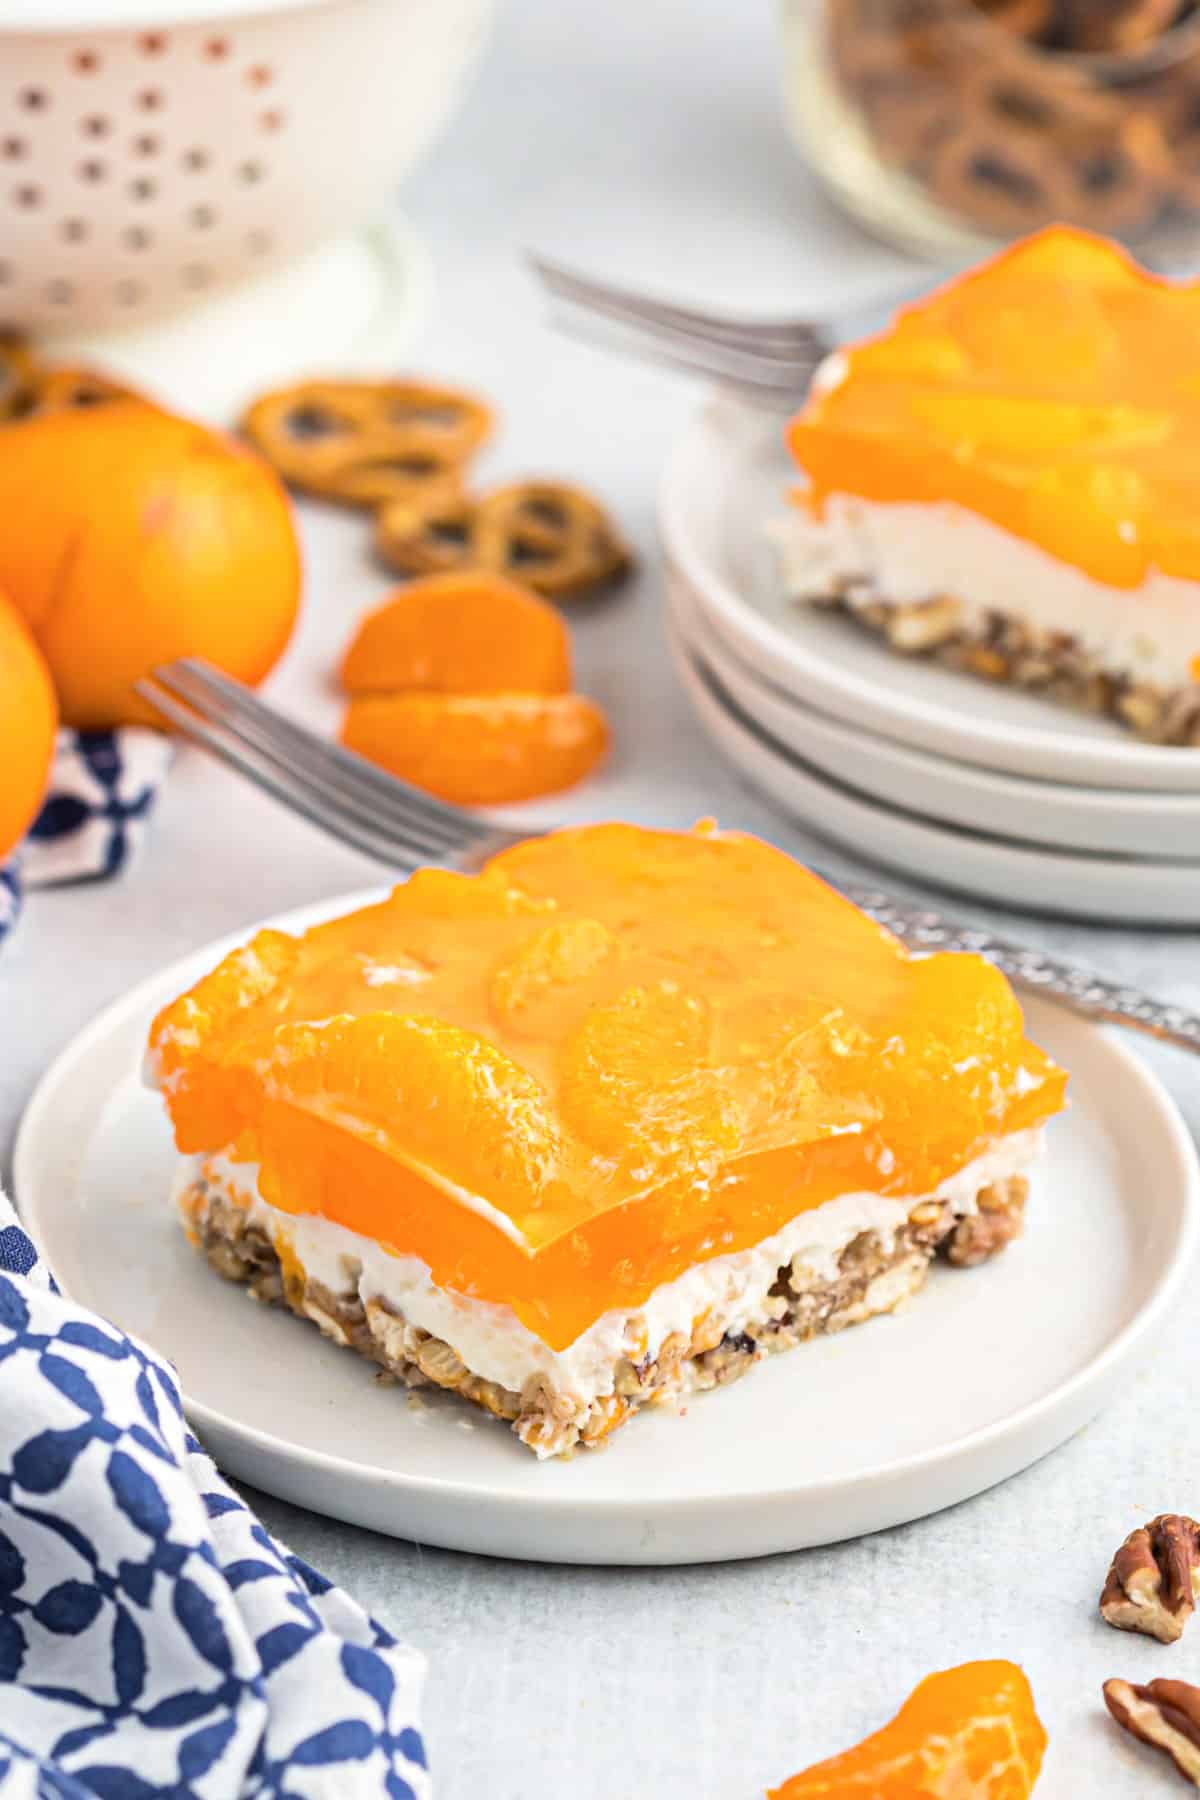 Slice of orange pretzel bar with cheesecake filling on a white plate.